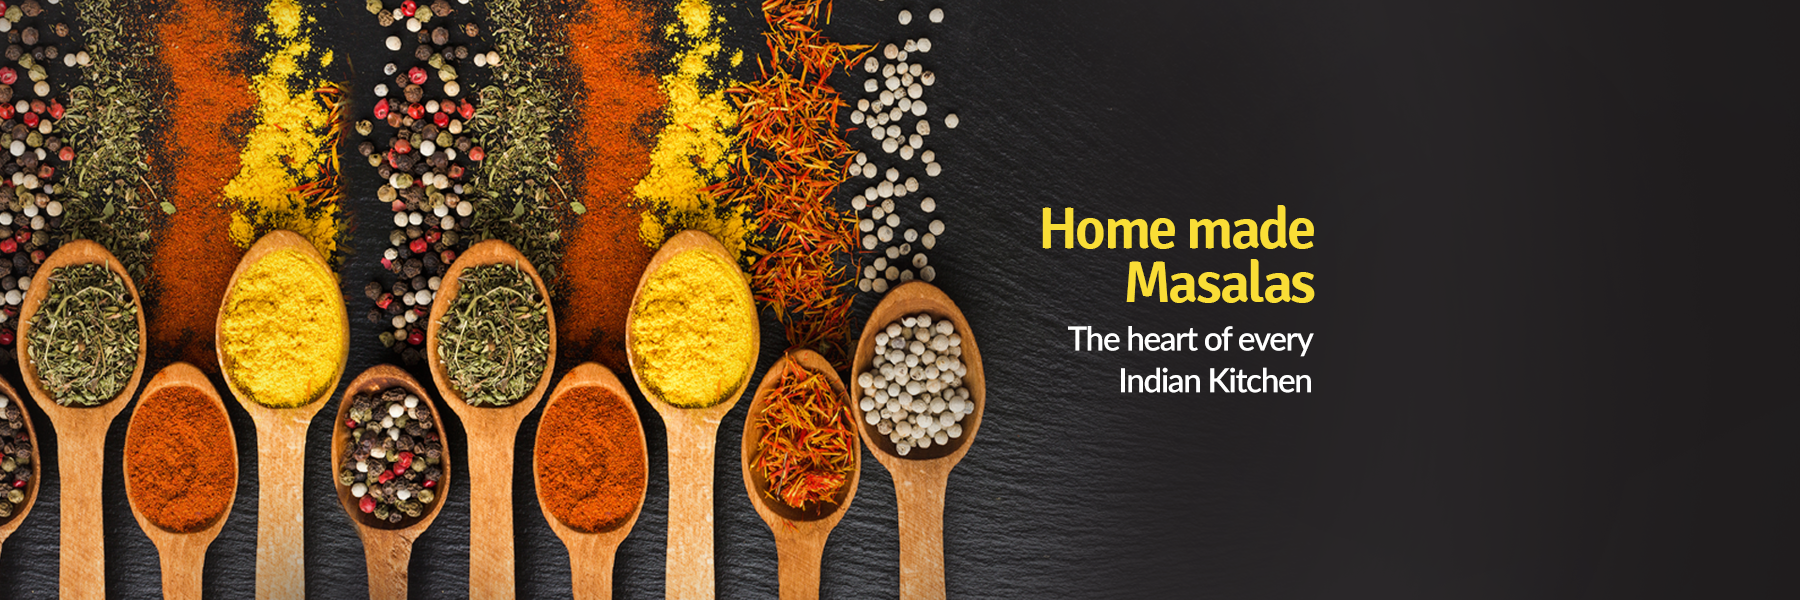 Homemade Masalas: The Heart of Every Indian Kitchen FromIndia.com